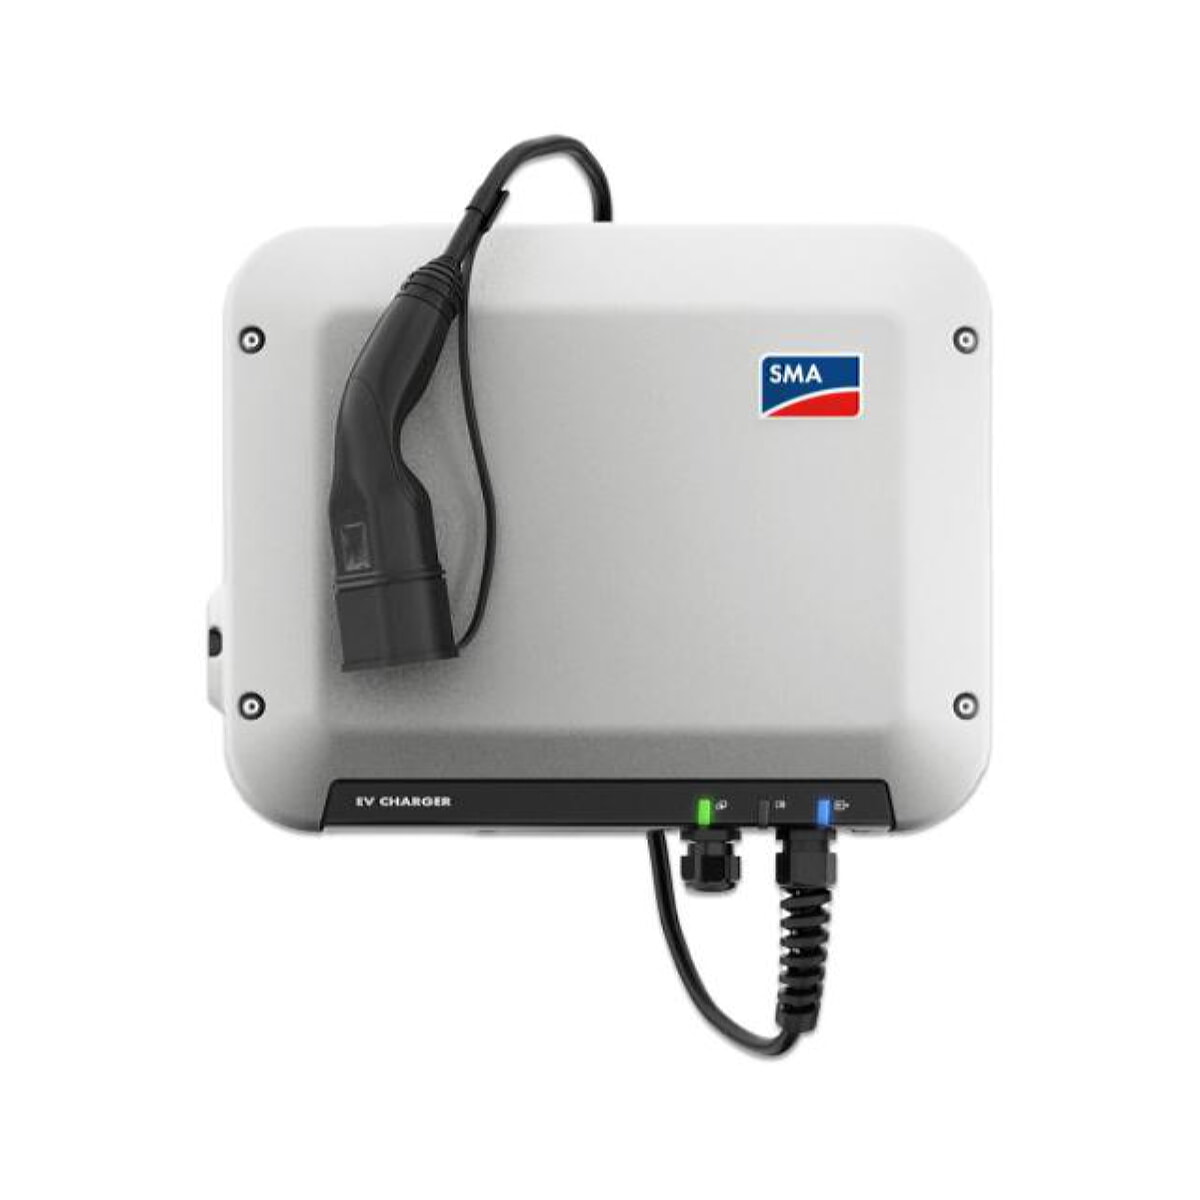 SMA EV CHARGER 7.4 Single-phase AC charging station with 5.0 m charging cable